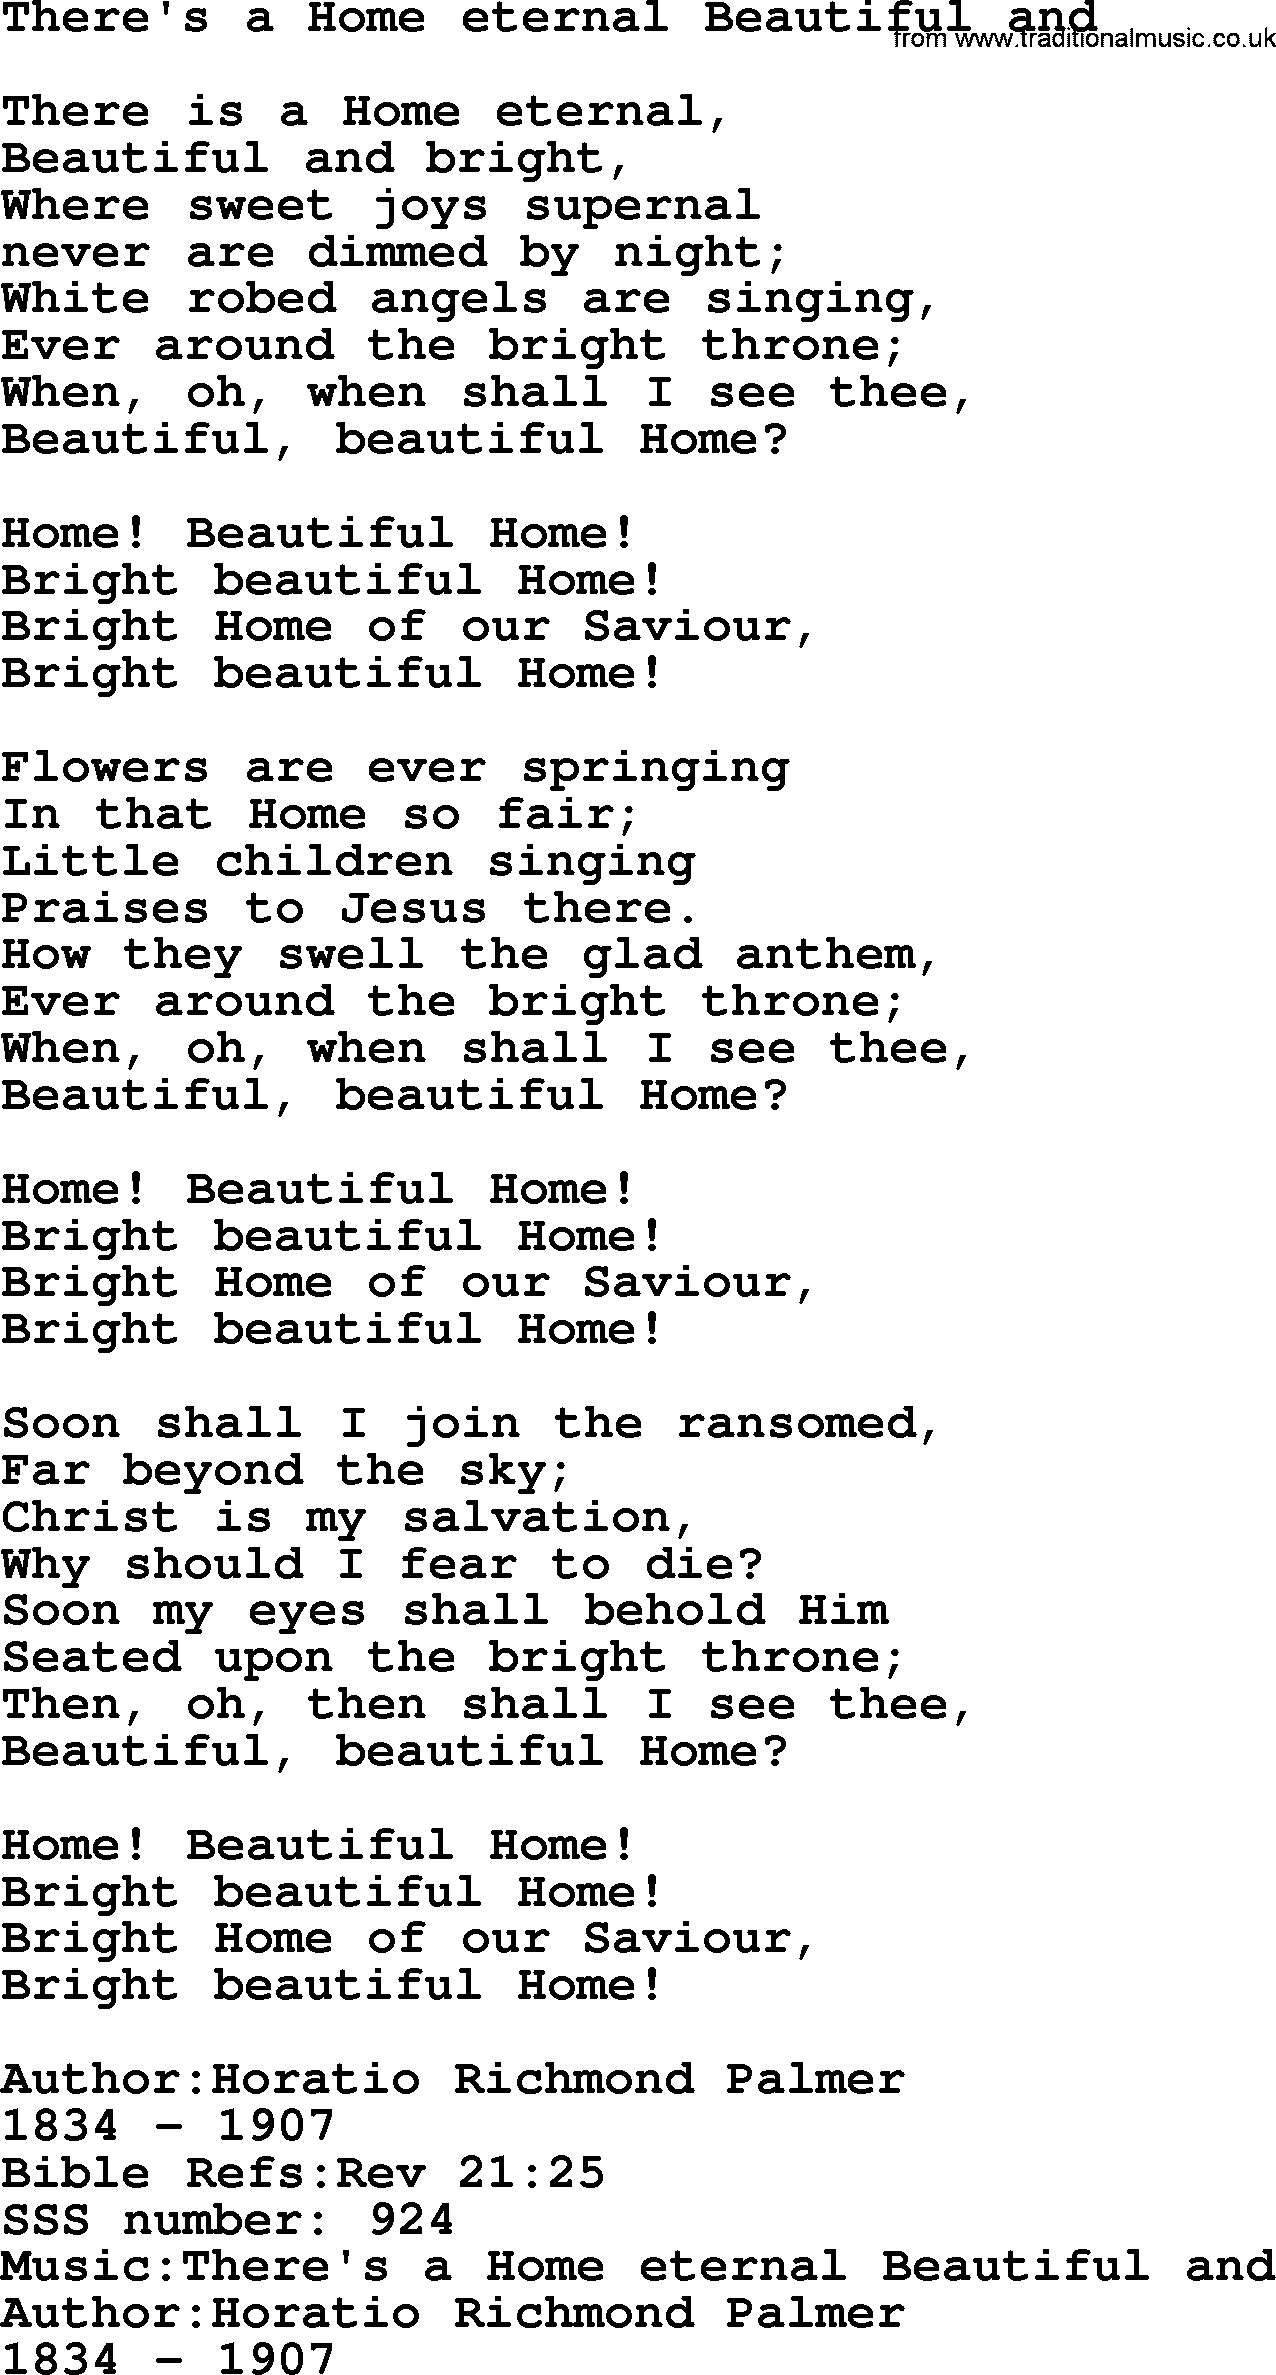 Sacred Songs and Solos complete, 1200 Hymns, title: There's A Home Eternal Beautiful And, lyrics and PDF